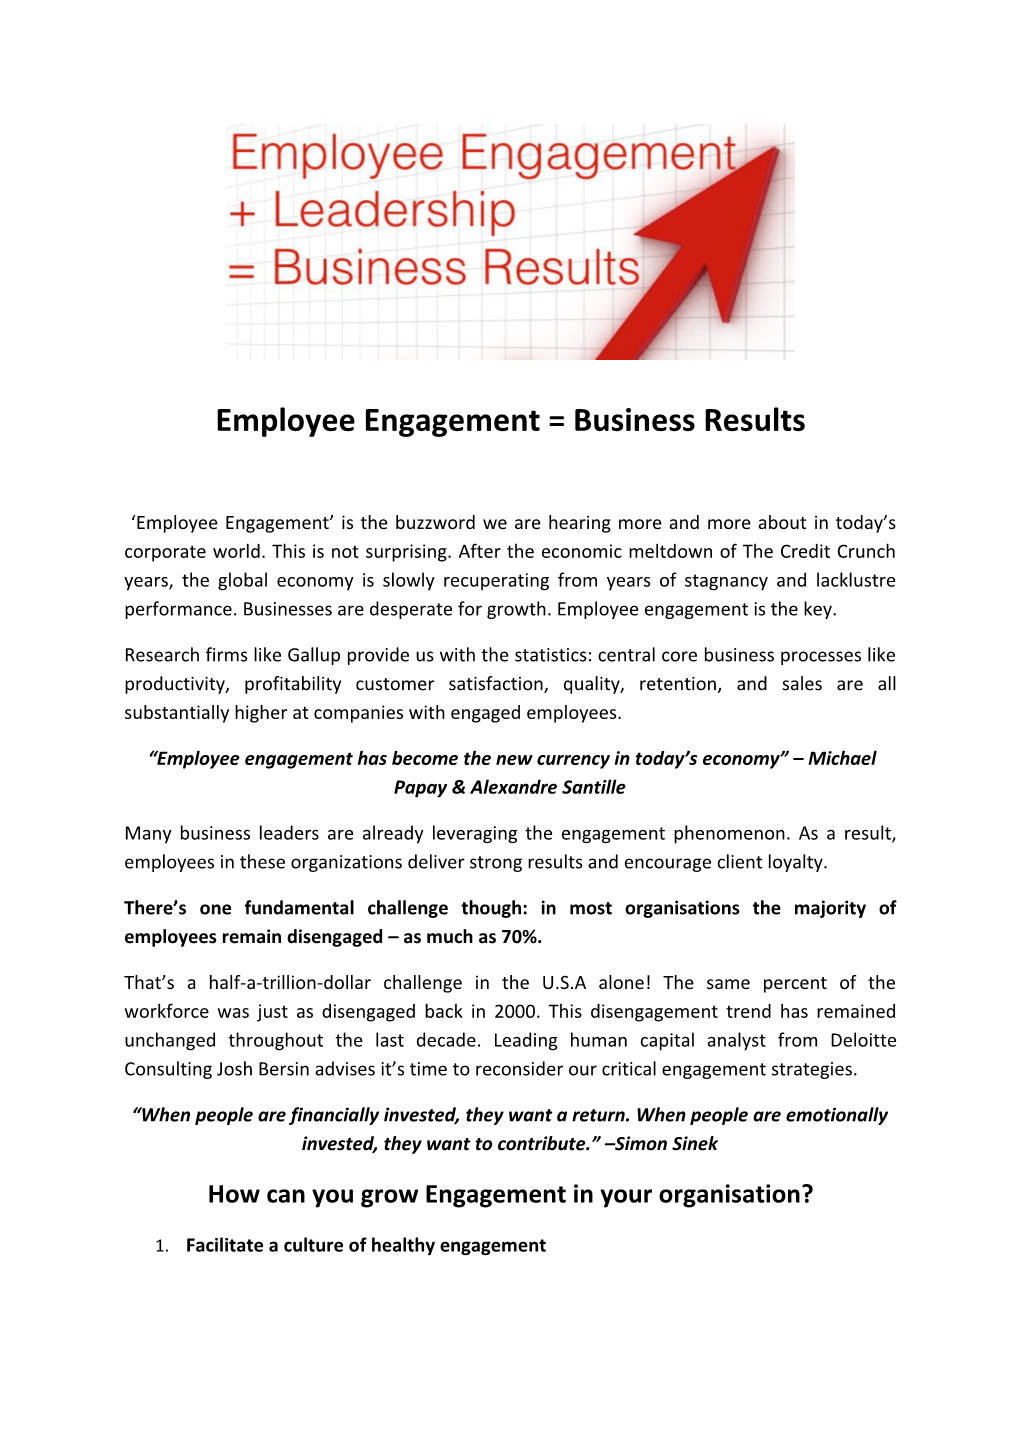 Employee Engagement = Business Results